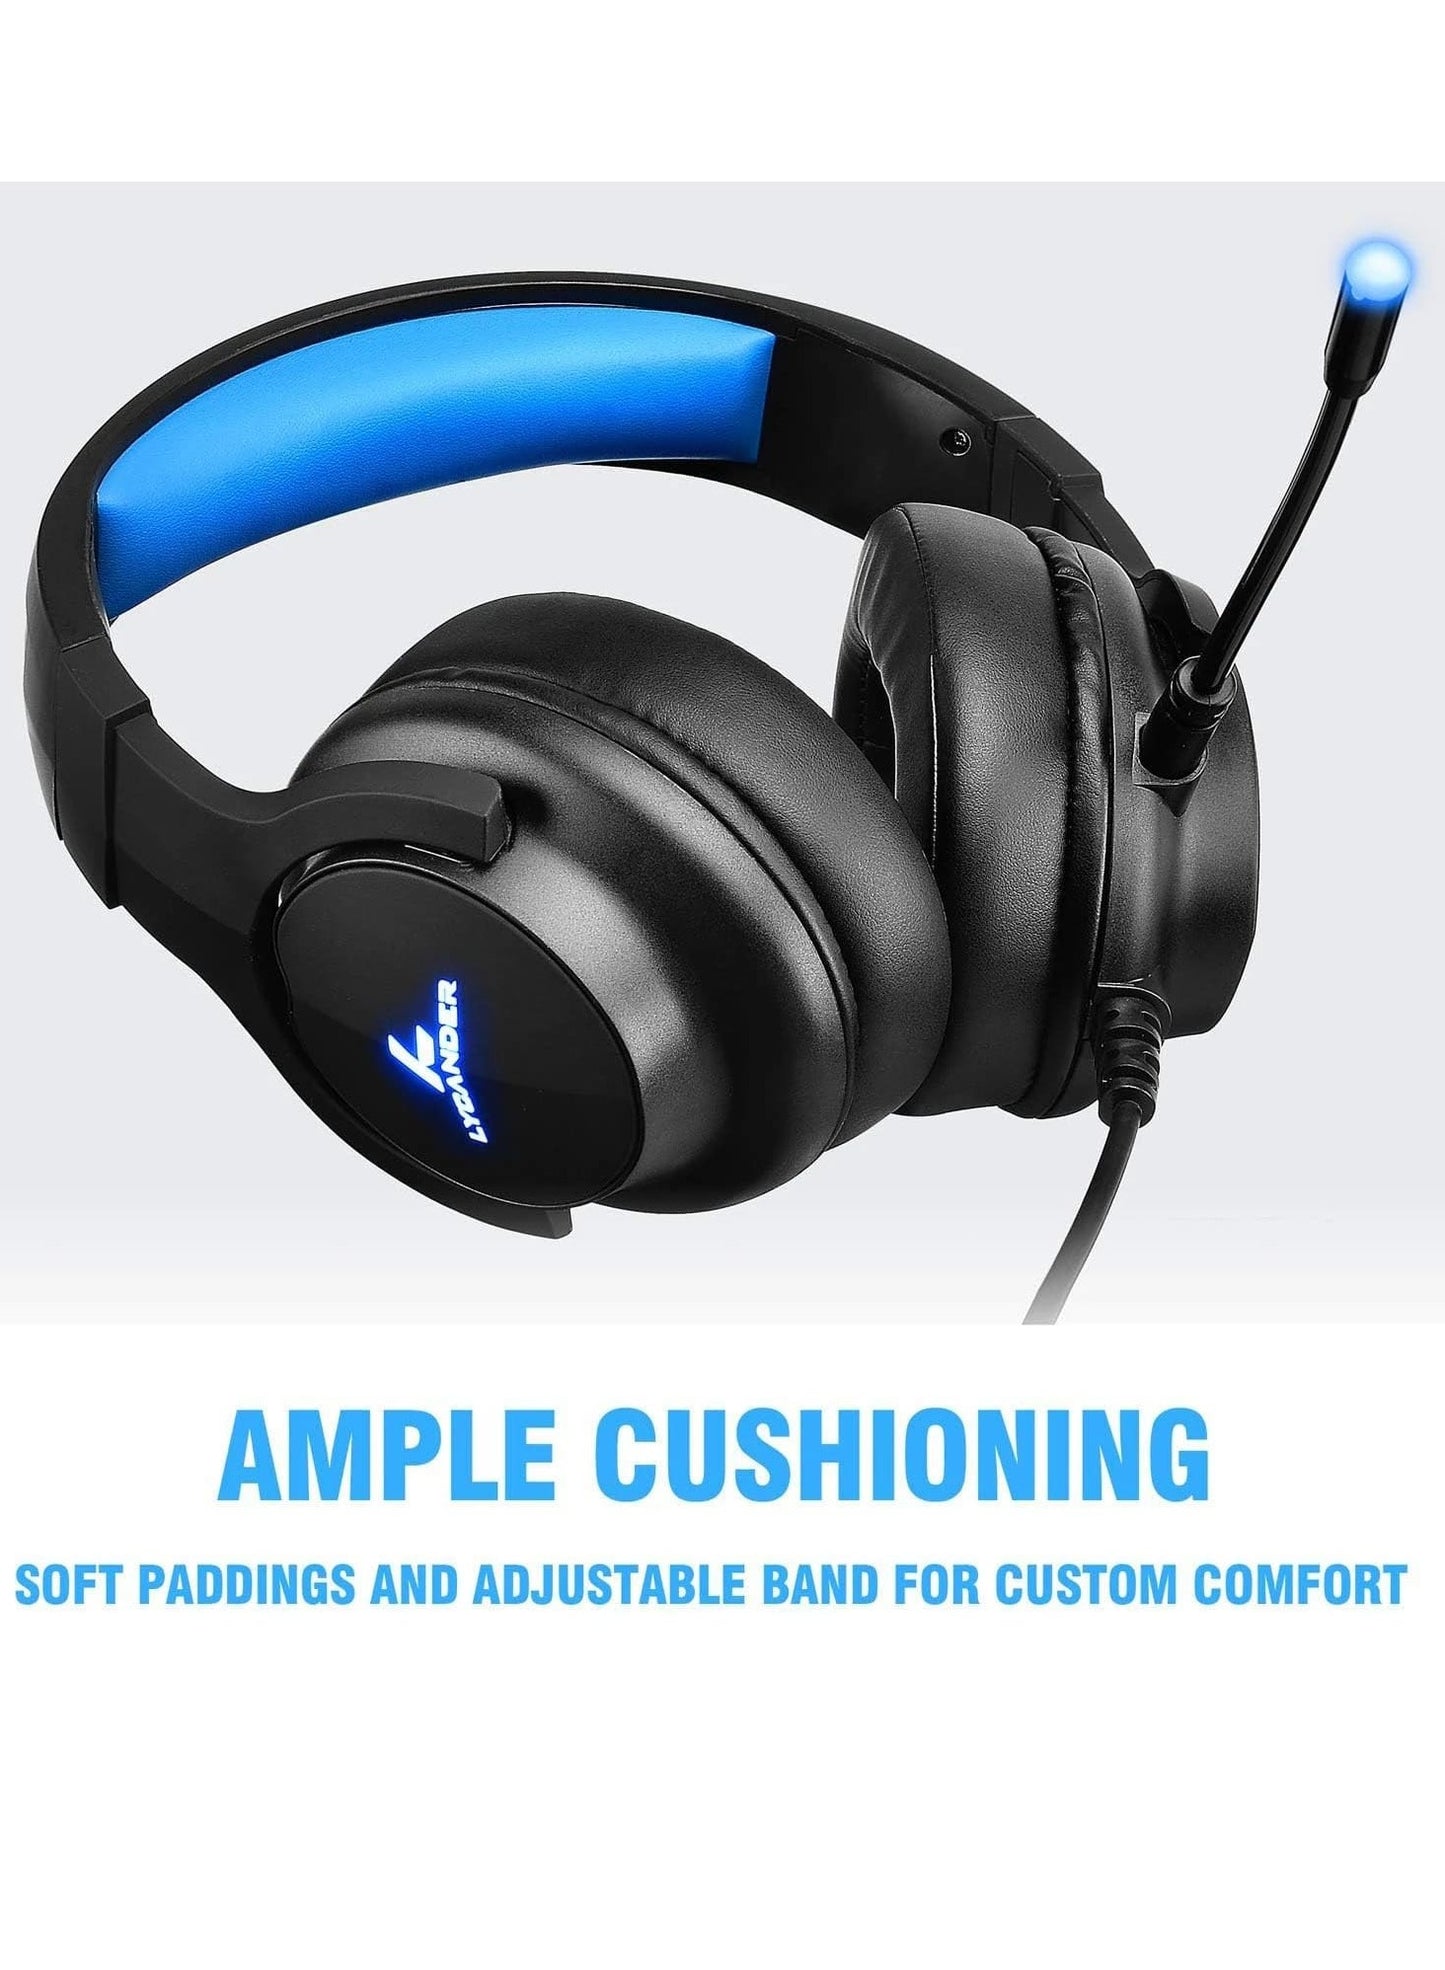 LGH568 Gaming Headset with Microphone LED Light, 3.5mm input - for PC, PS4, Xbox One, Nintendo Switch and more